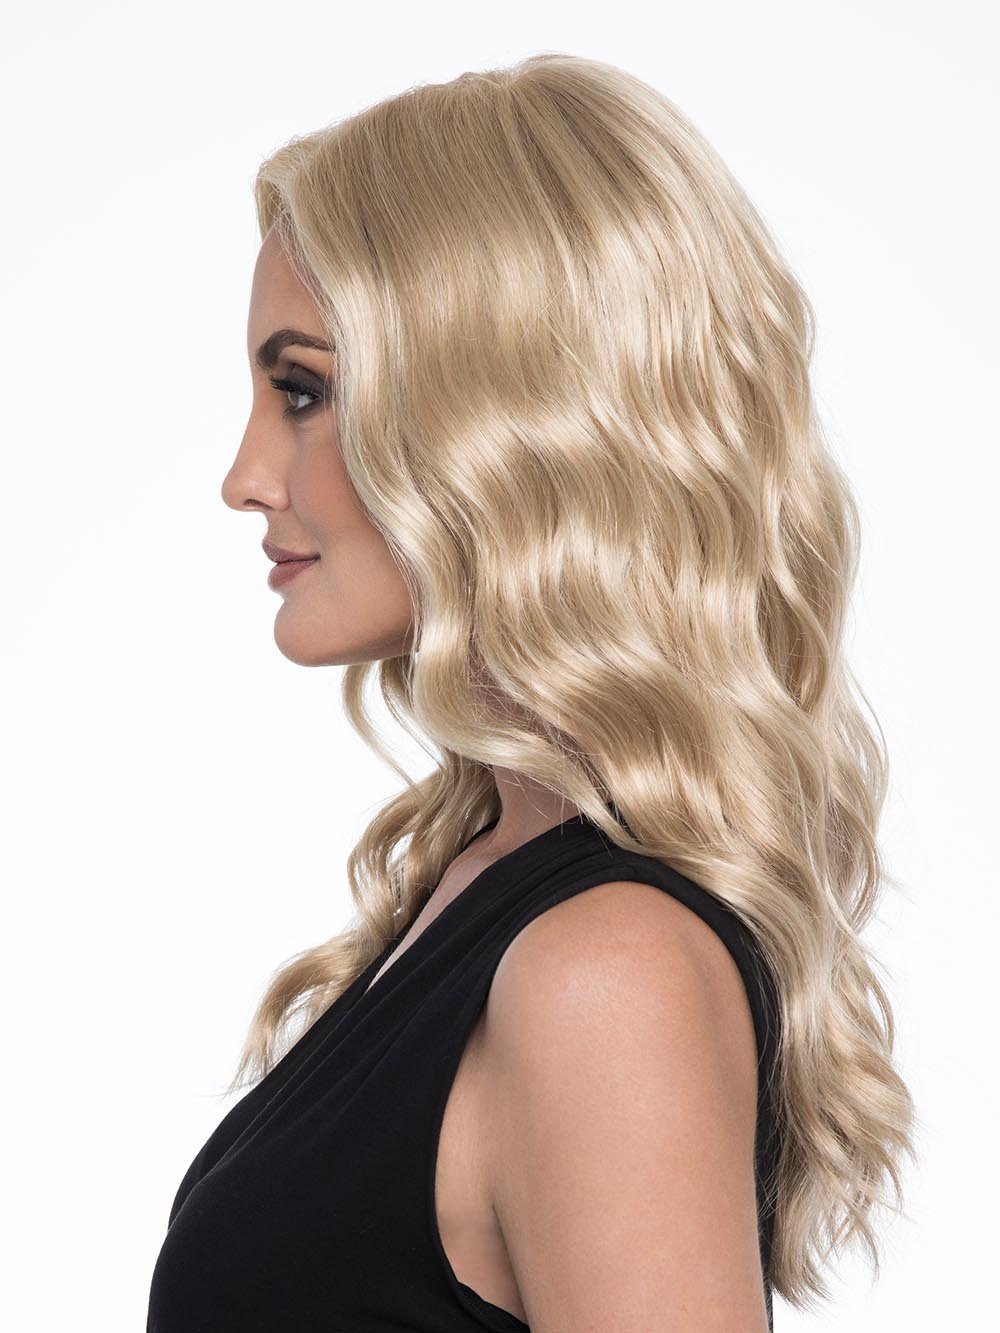 The Lace Front Mono Top construction offers the utmost in styling versatility